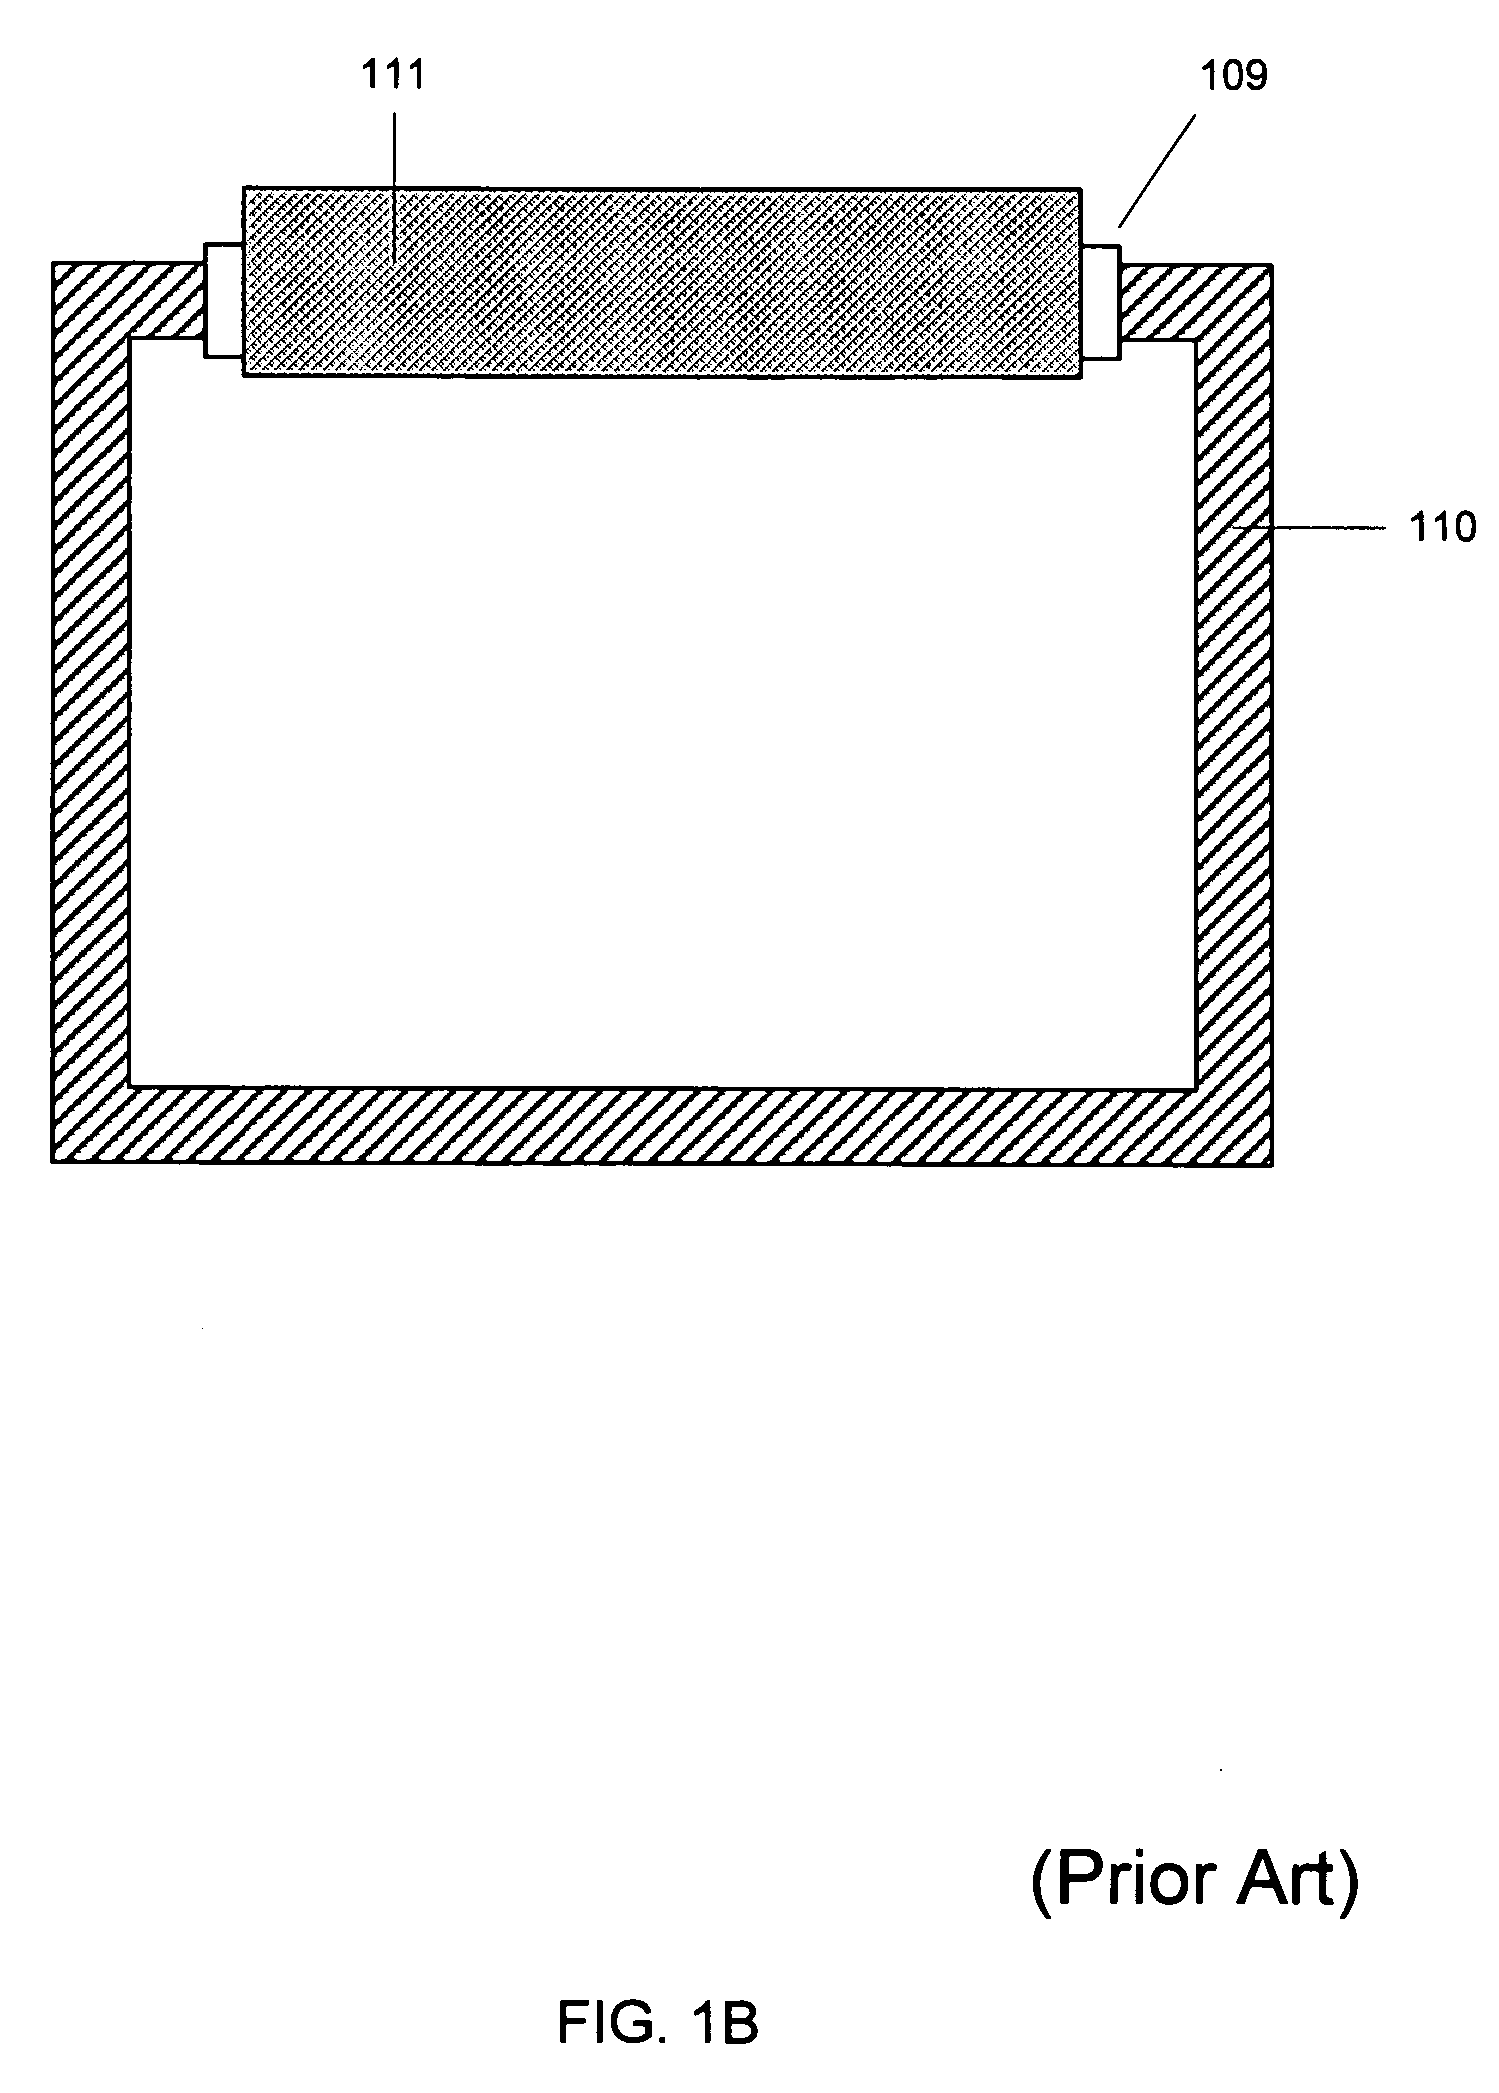 Method and apparatuses for high pressure gas annealing